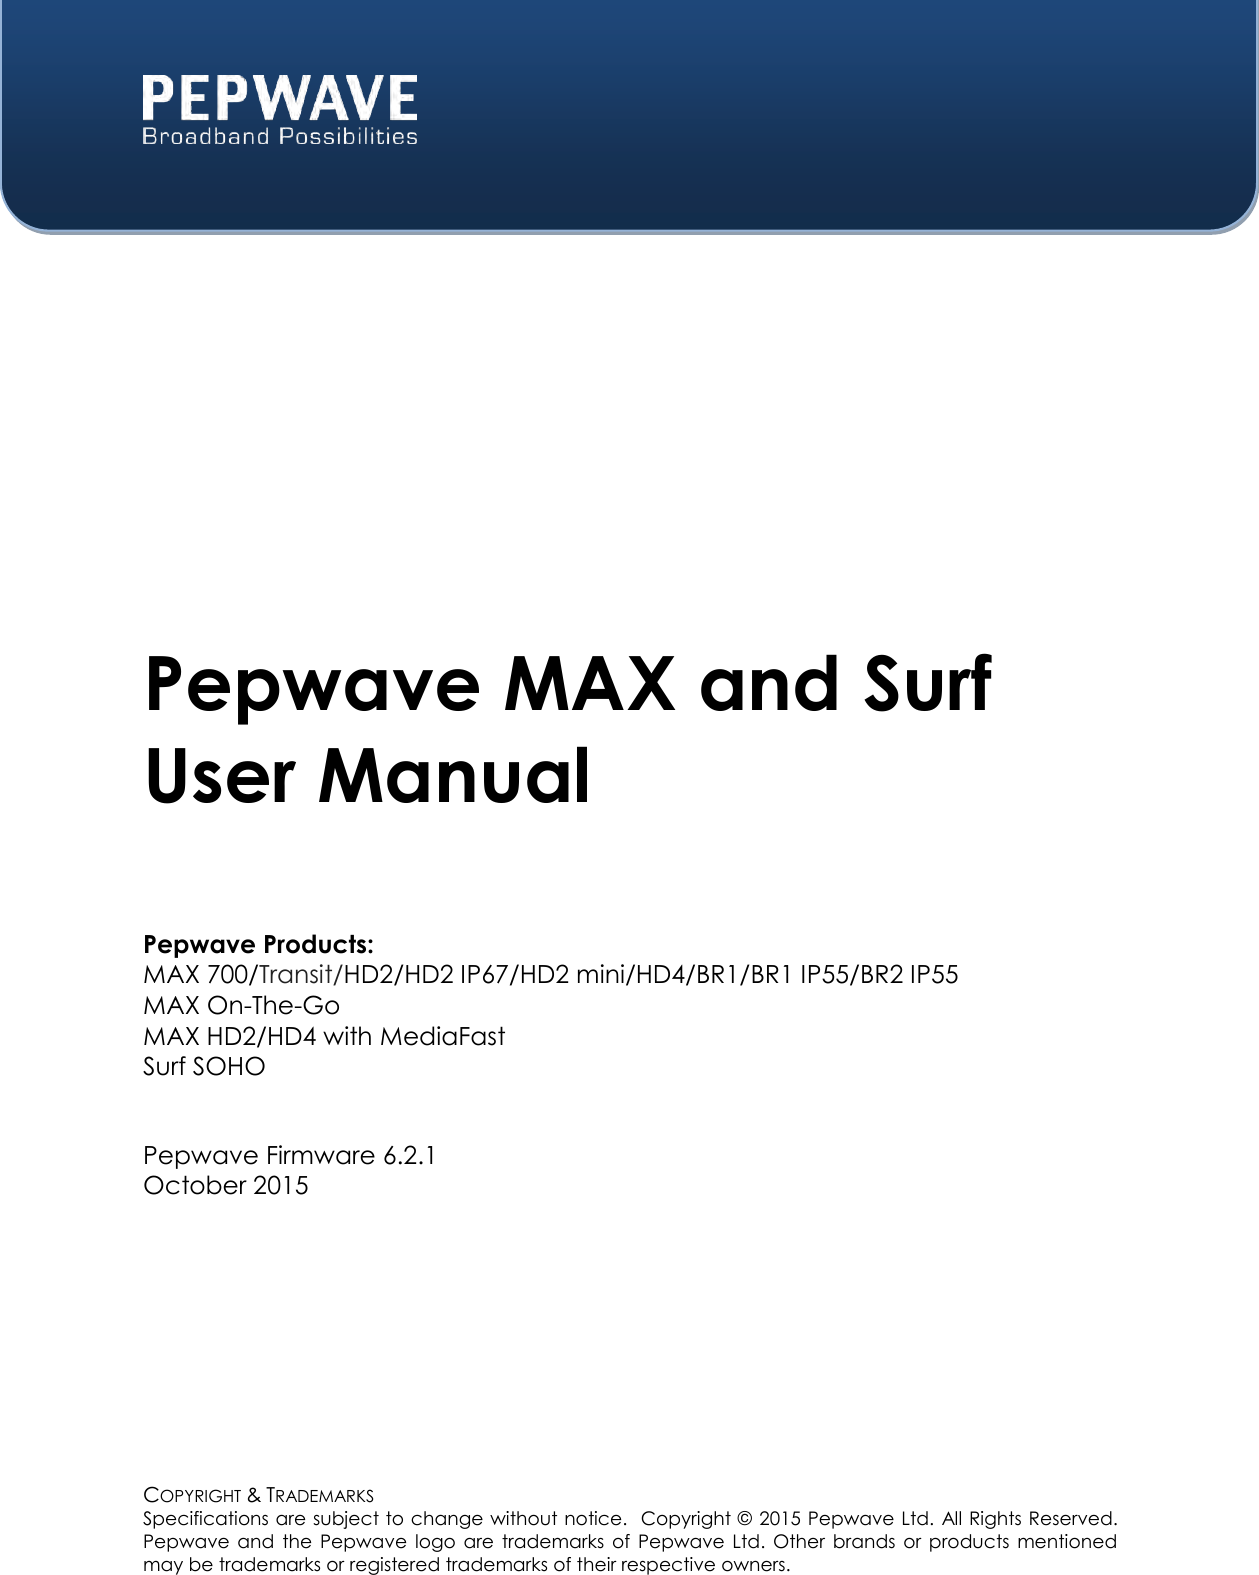  COPYRIGHT &amp; TRADEMARKS Specifications are subject to change without notice.  Copyright ©   2015 Pepwave Ltd. All Rights Reserved.  Pepwave and  the  Pepwave  logo  are  trademarks  of  Pepwave  Ltd.  Other  brands  or  products  mentioned may be trademarks or registered trademarks of their respective owners.    Pepwave MAX and Surf User Manual  Pepwave Products: MAX 700/Transit/HD2/HD2 IP67/HD2 mini/HD4/BR1/BR1 IP55/BR2 IP55 MAX On-The-Go MAX HD2/HD4 with MediaFast Surf SOHO   Pepwave Firmware 6.2.1 October 2015